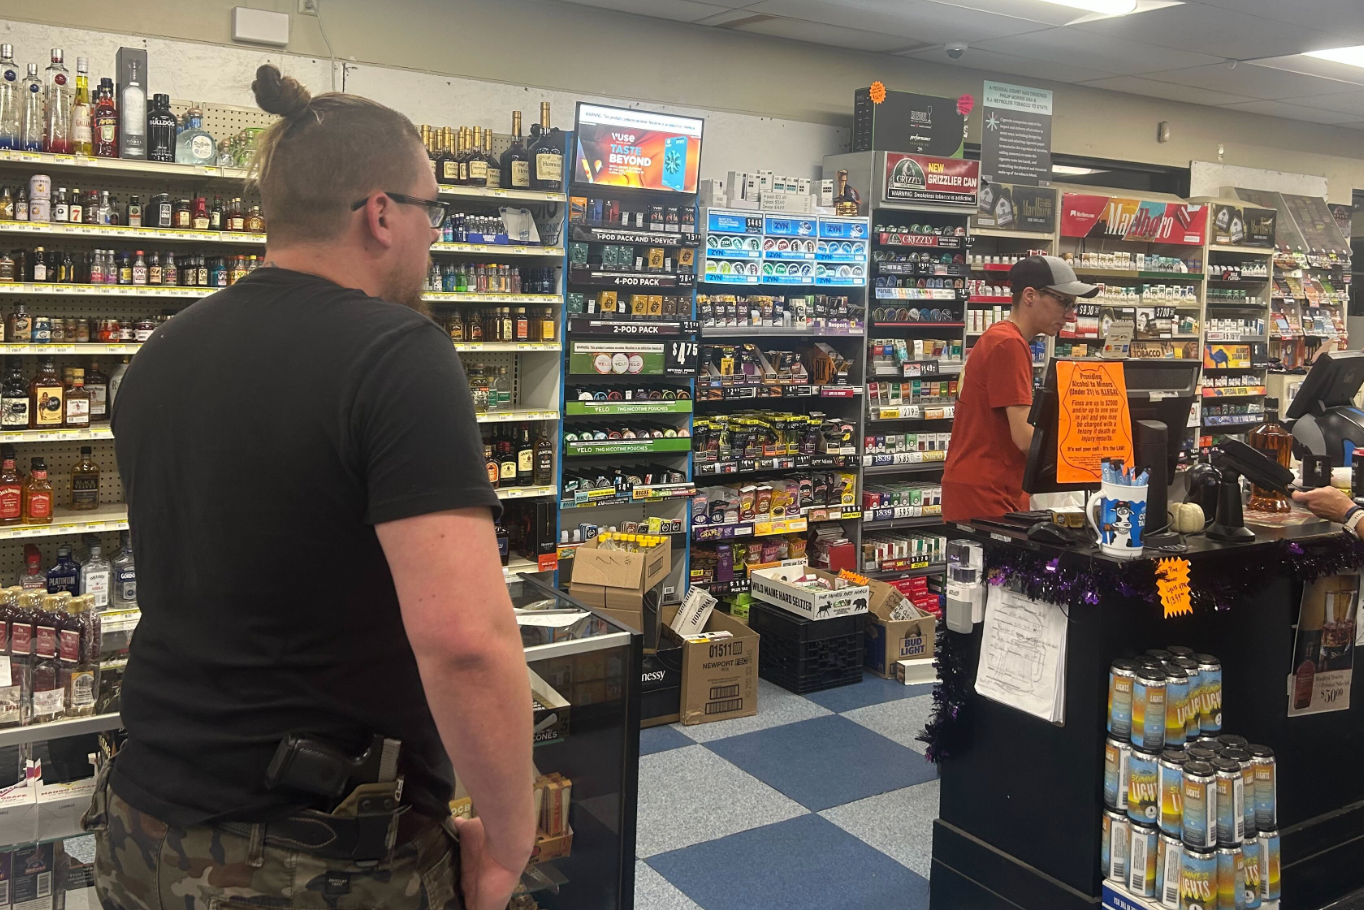 Steve Demele made a stop at the Roopers Beverage & Redemption carrying a gun in his holster